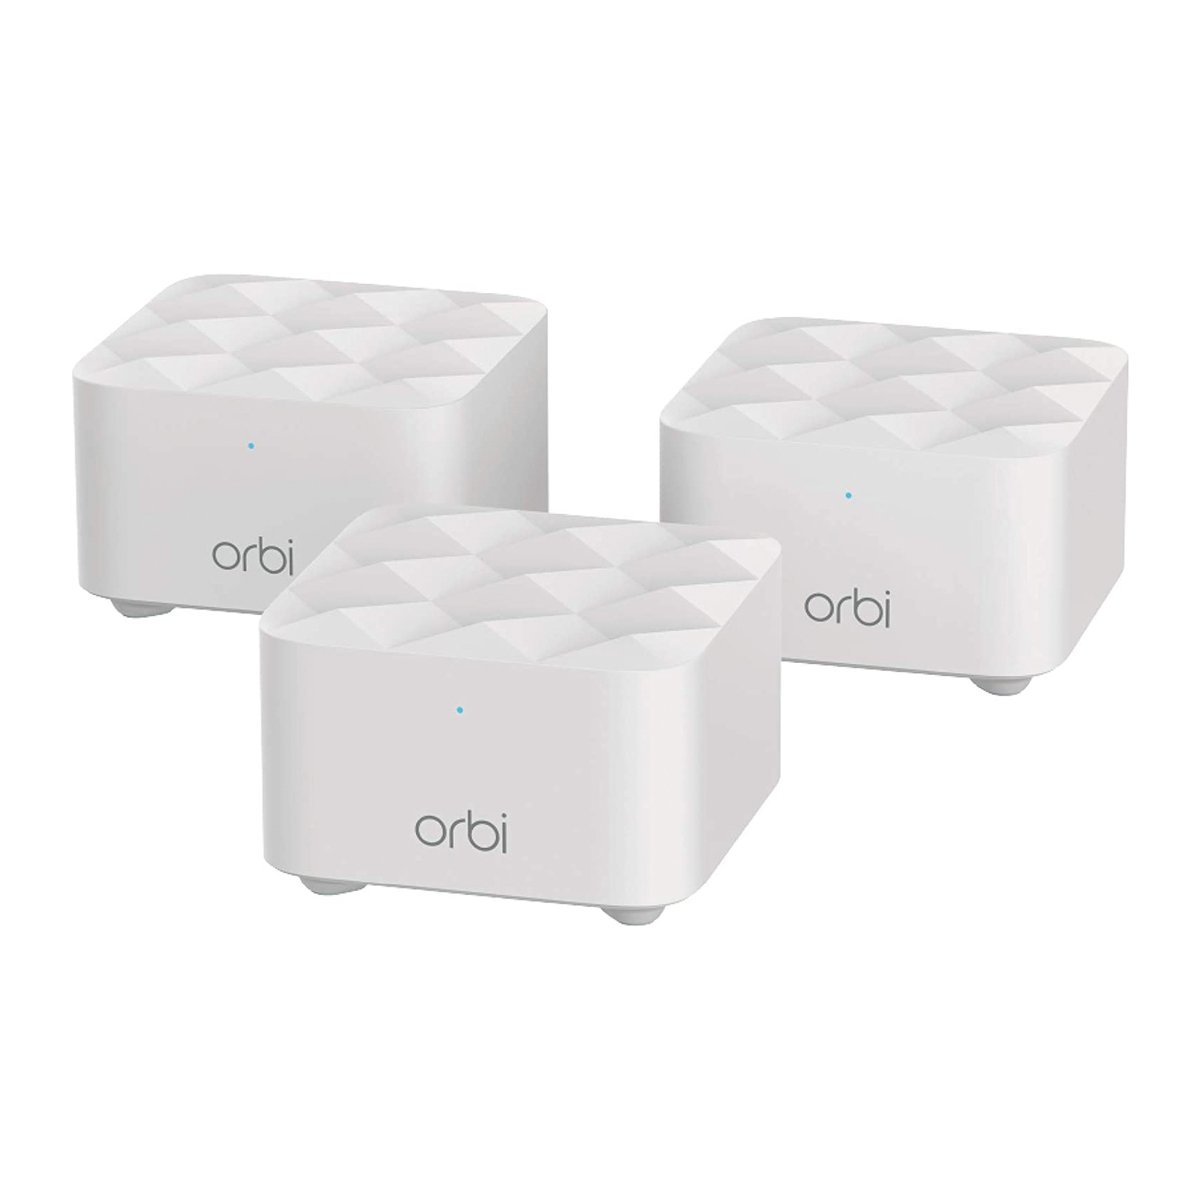 Buy Netgear Orbi Whole Home Mesh WiFi System (RBK13) Router replacement covers up to 4,500 sq. ft. with 1 Router & 2 Satellites Online at Best Price | W/L Routers | Lulu UAE in UAE